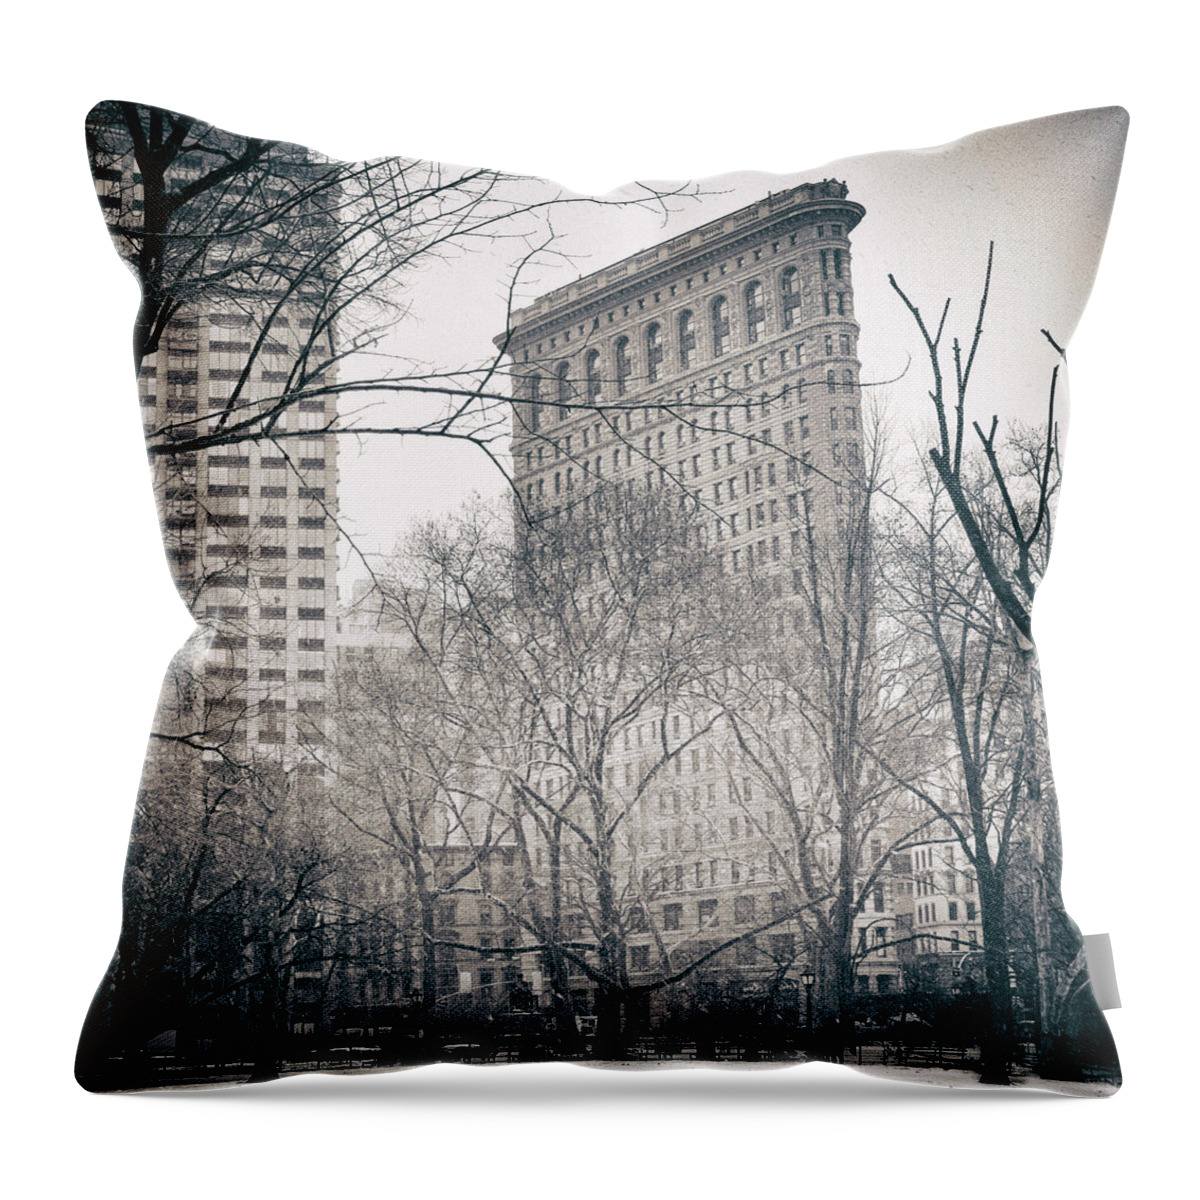 Flatiron Building Throw Pillow featuring the photograph Flatiron District 2 by Jessica Jenney